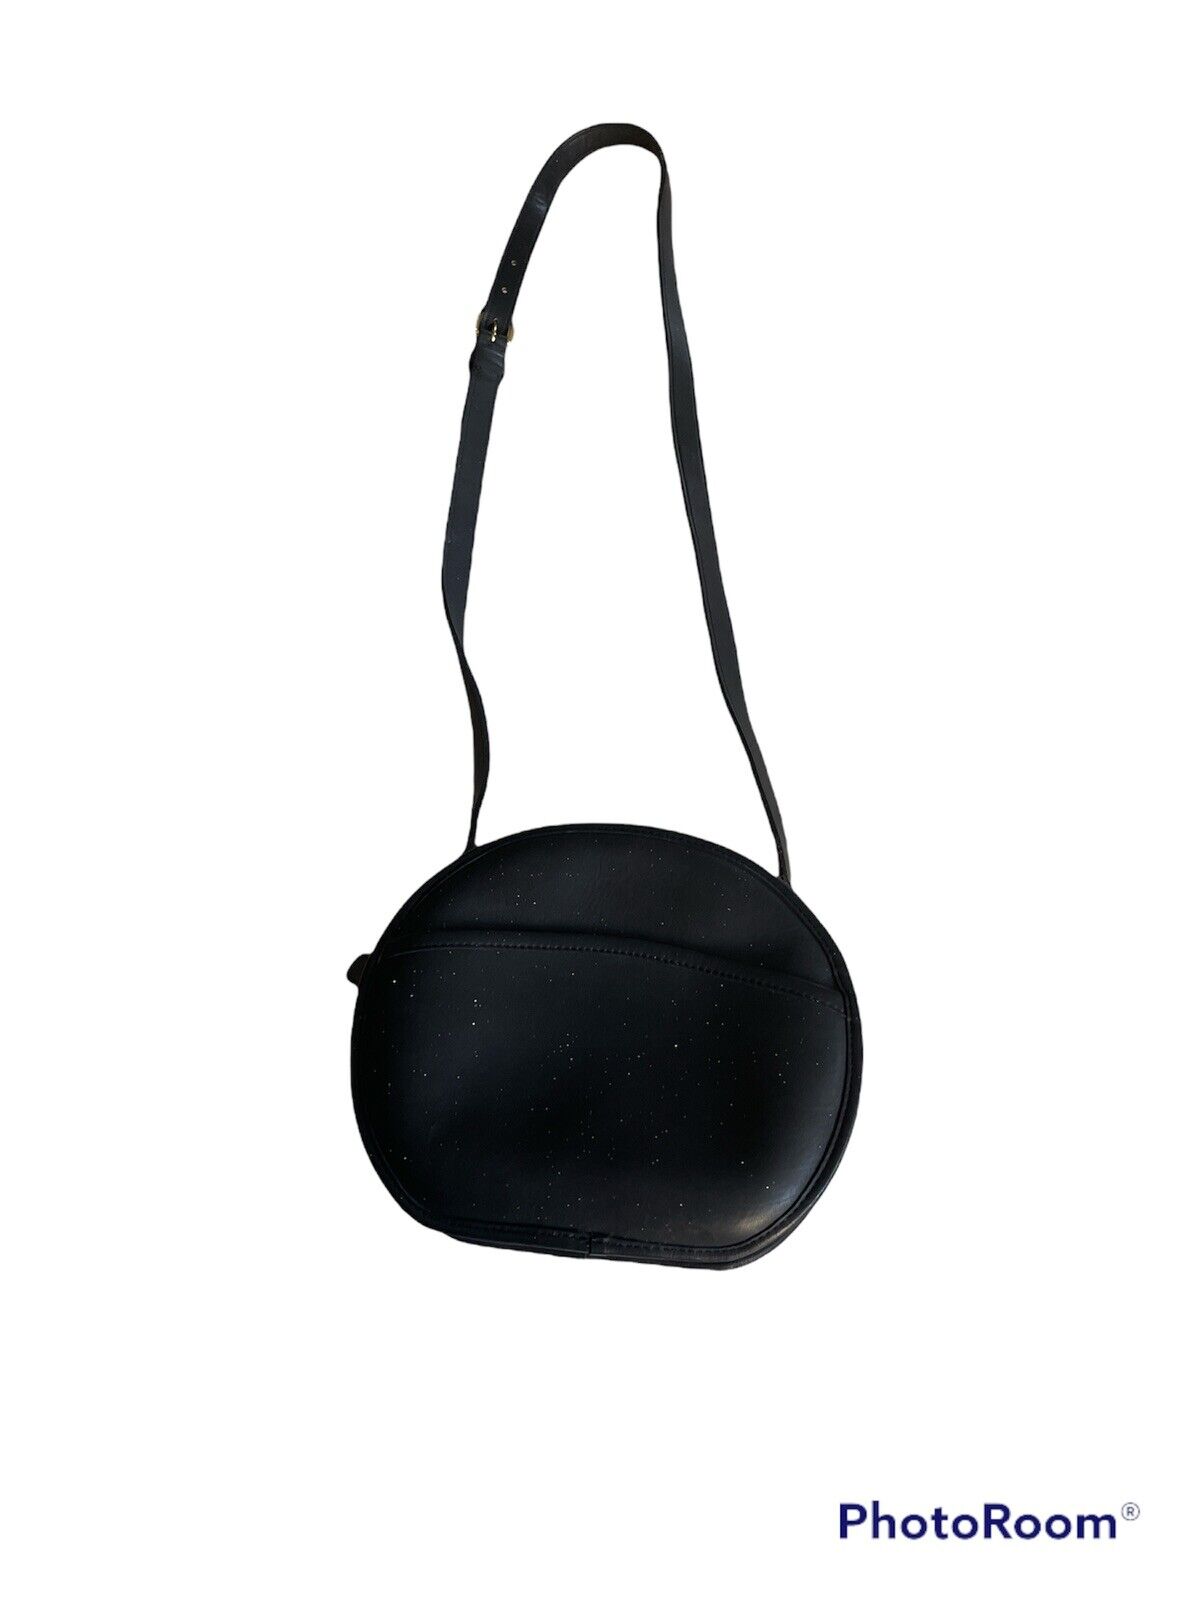 Preowned Crossbody Black Leather Puse - image 3